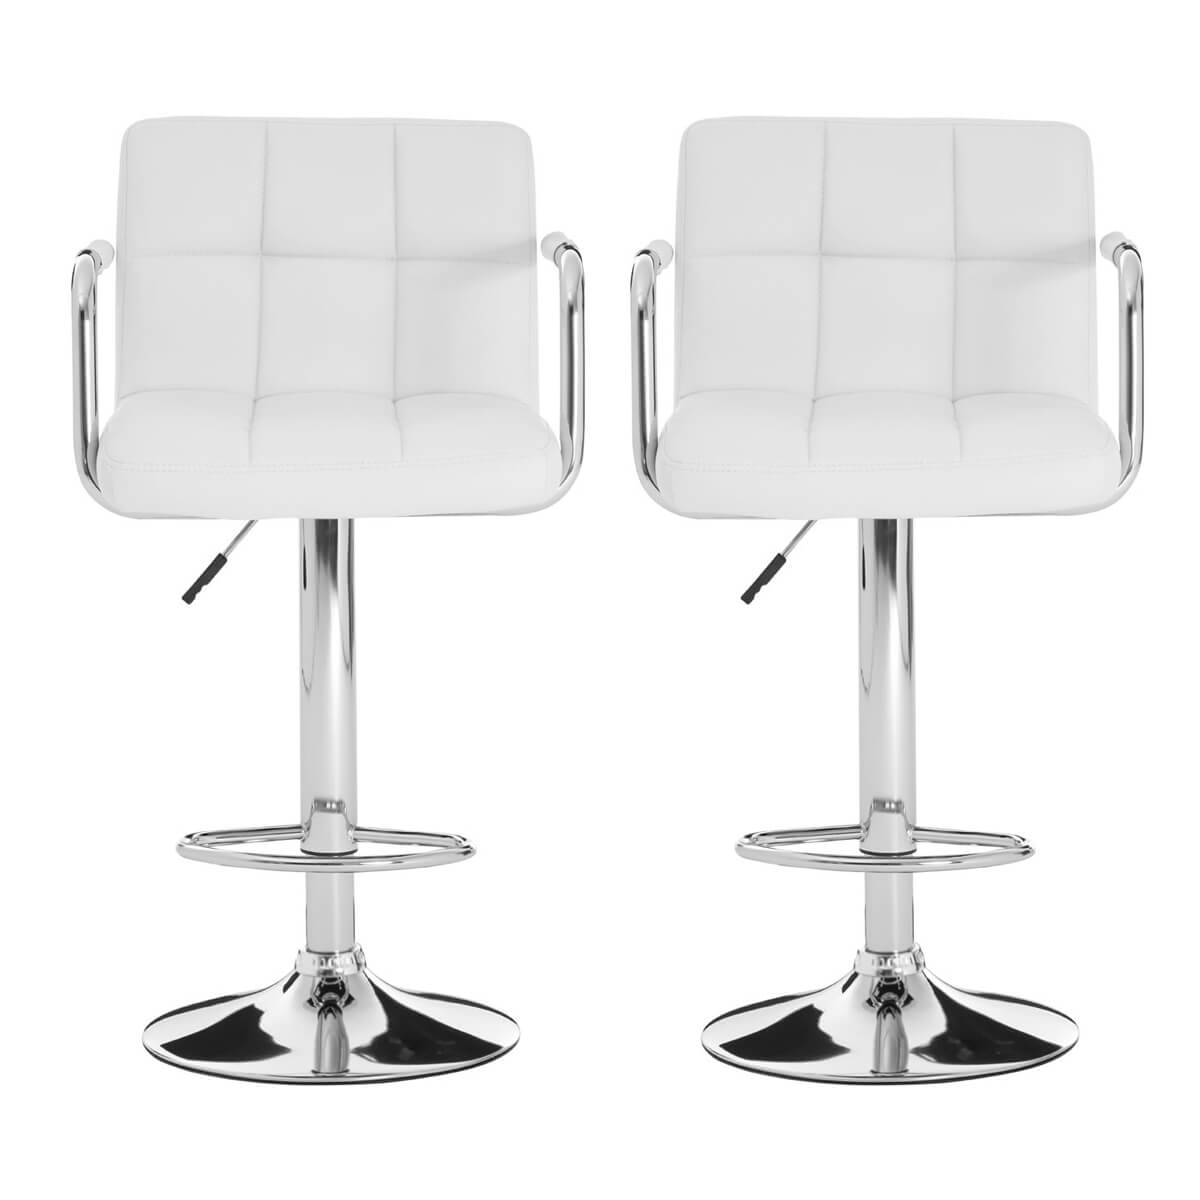 Stars White Faux Leather Bar Stool, White Leather Bar Stools With Arms